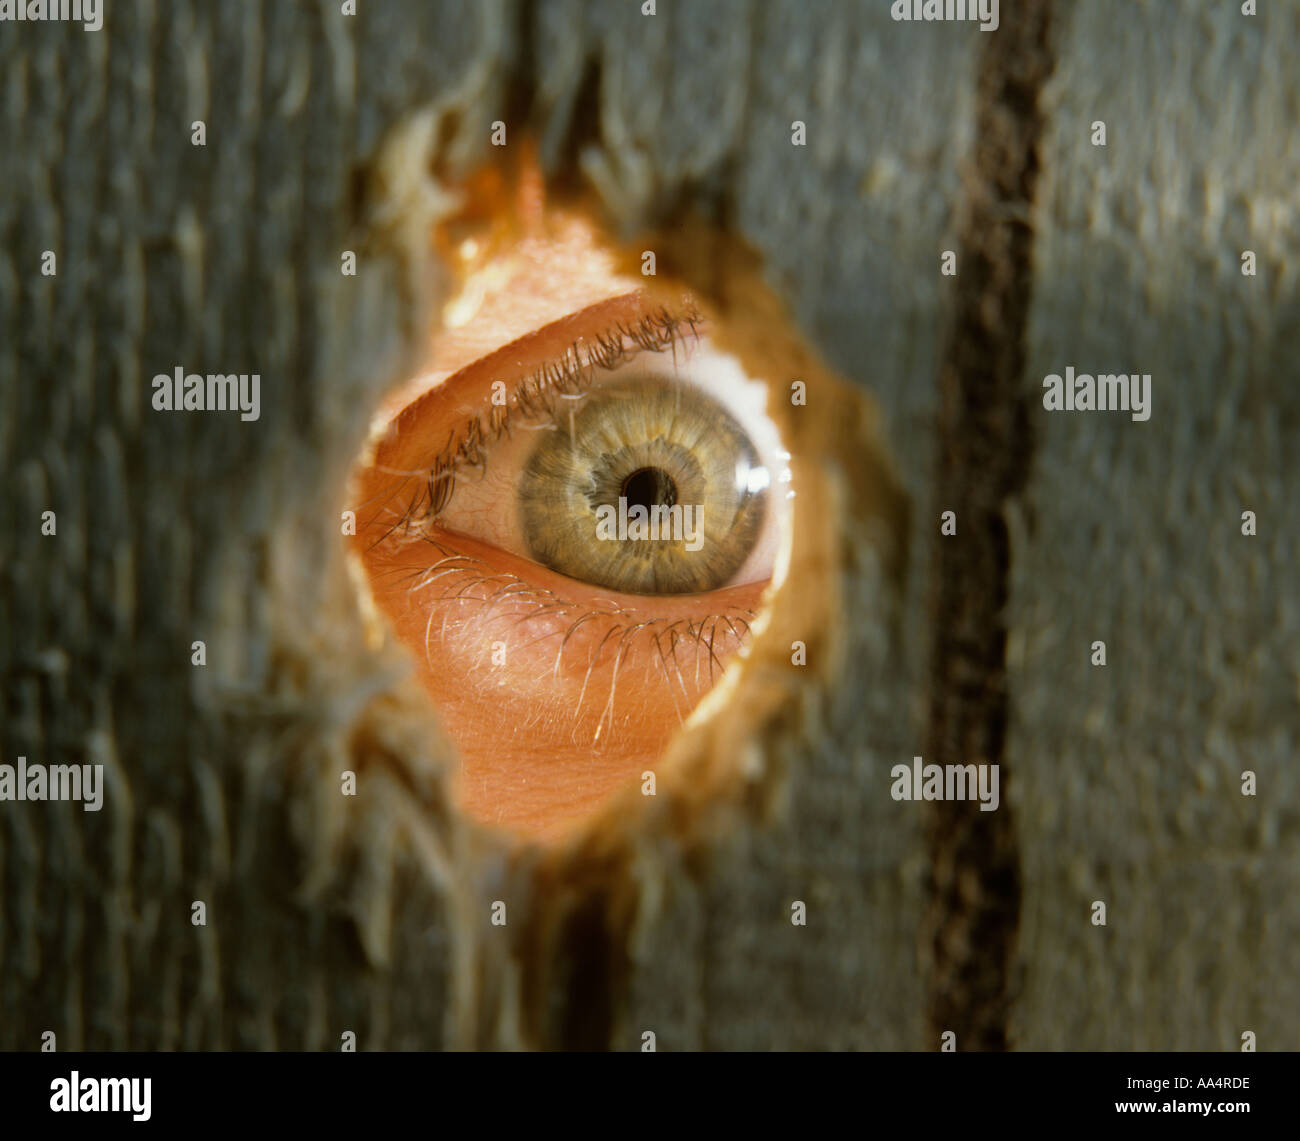 Eye Looking Through Hole In Wooden Fence Stock Photo Alamy